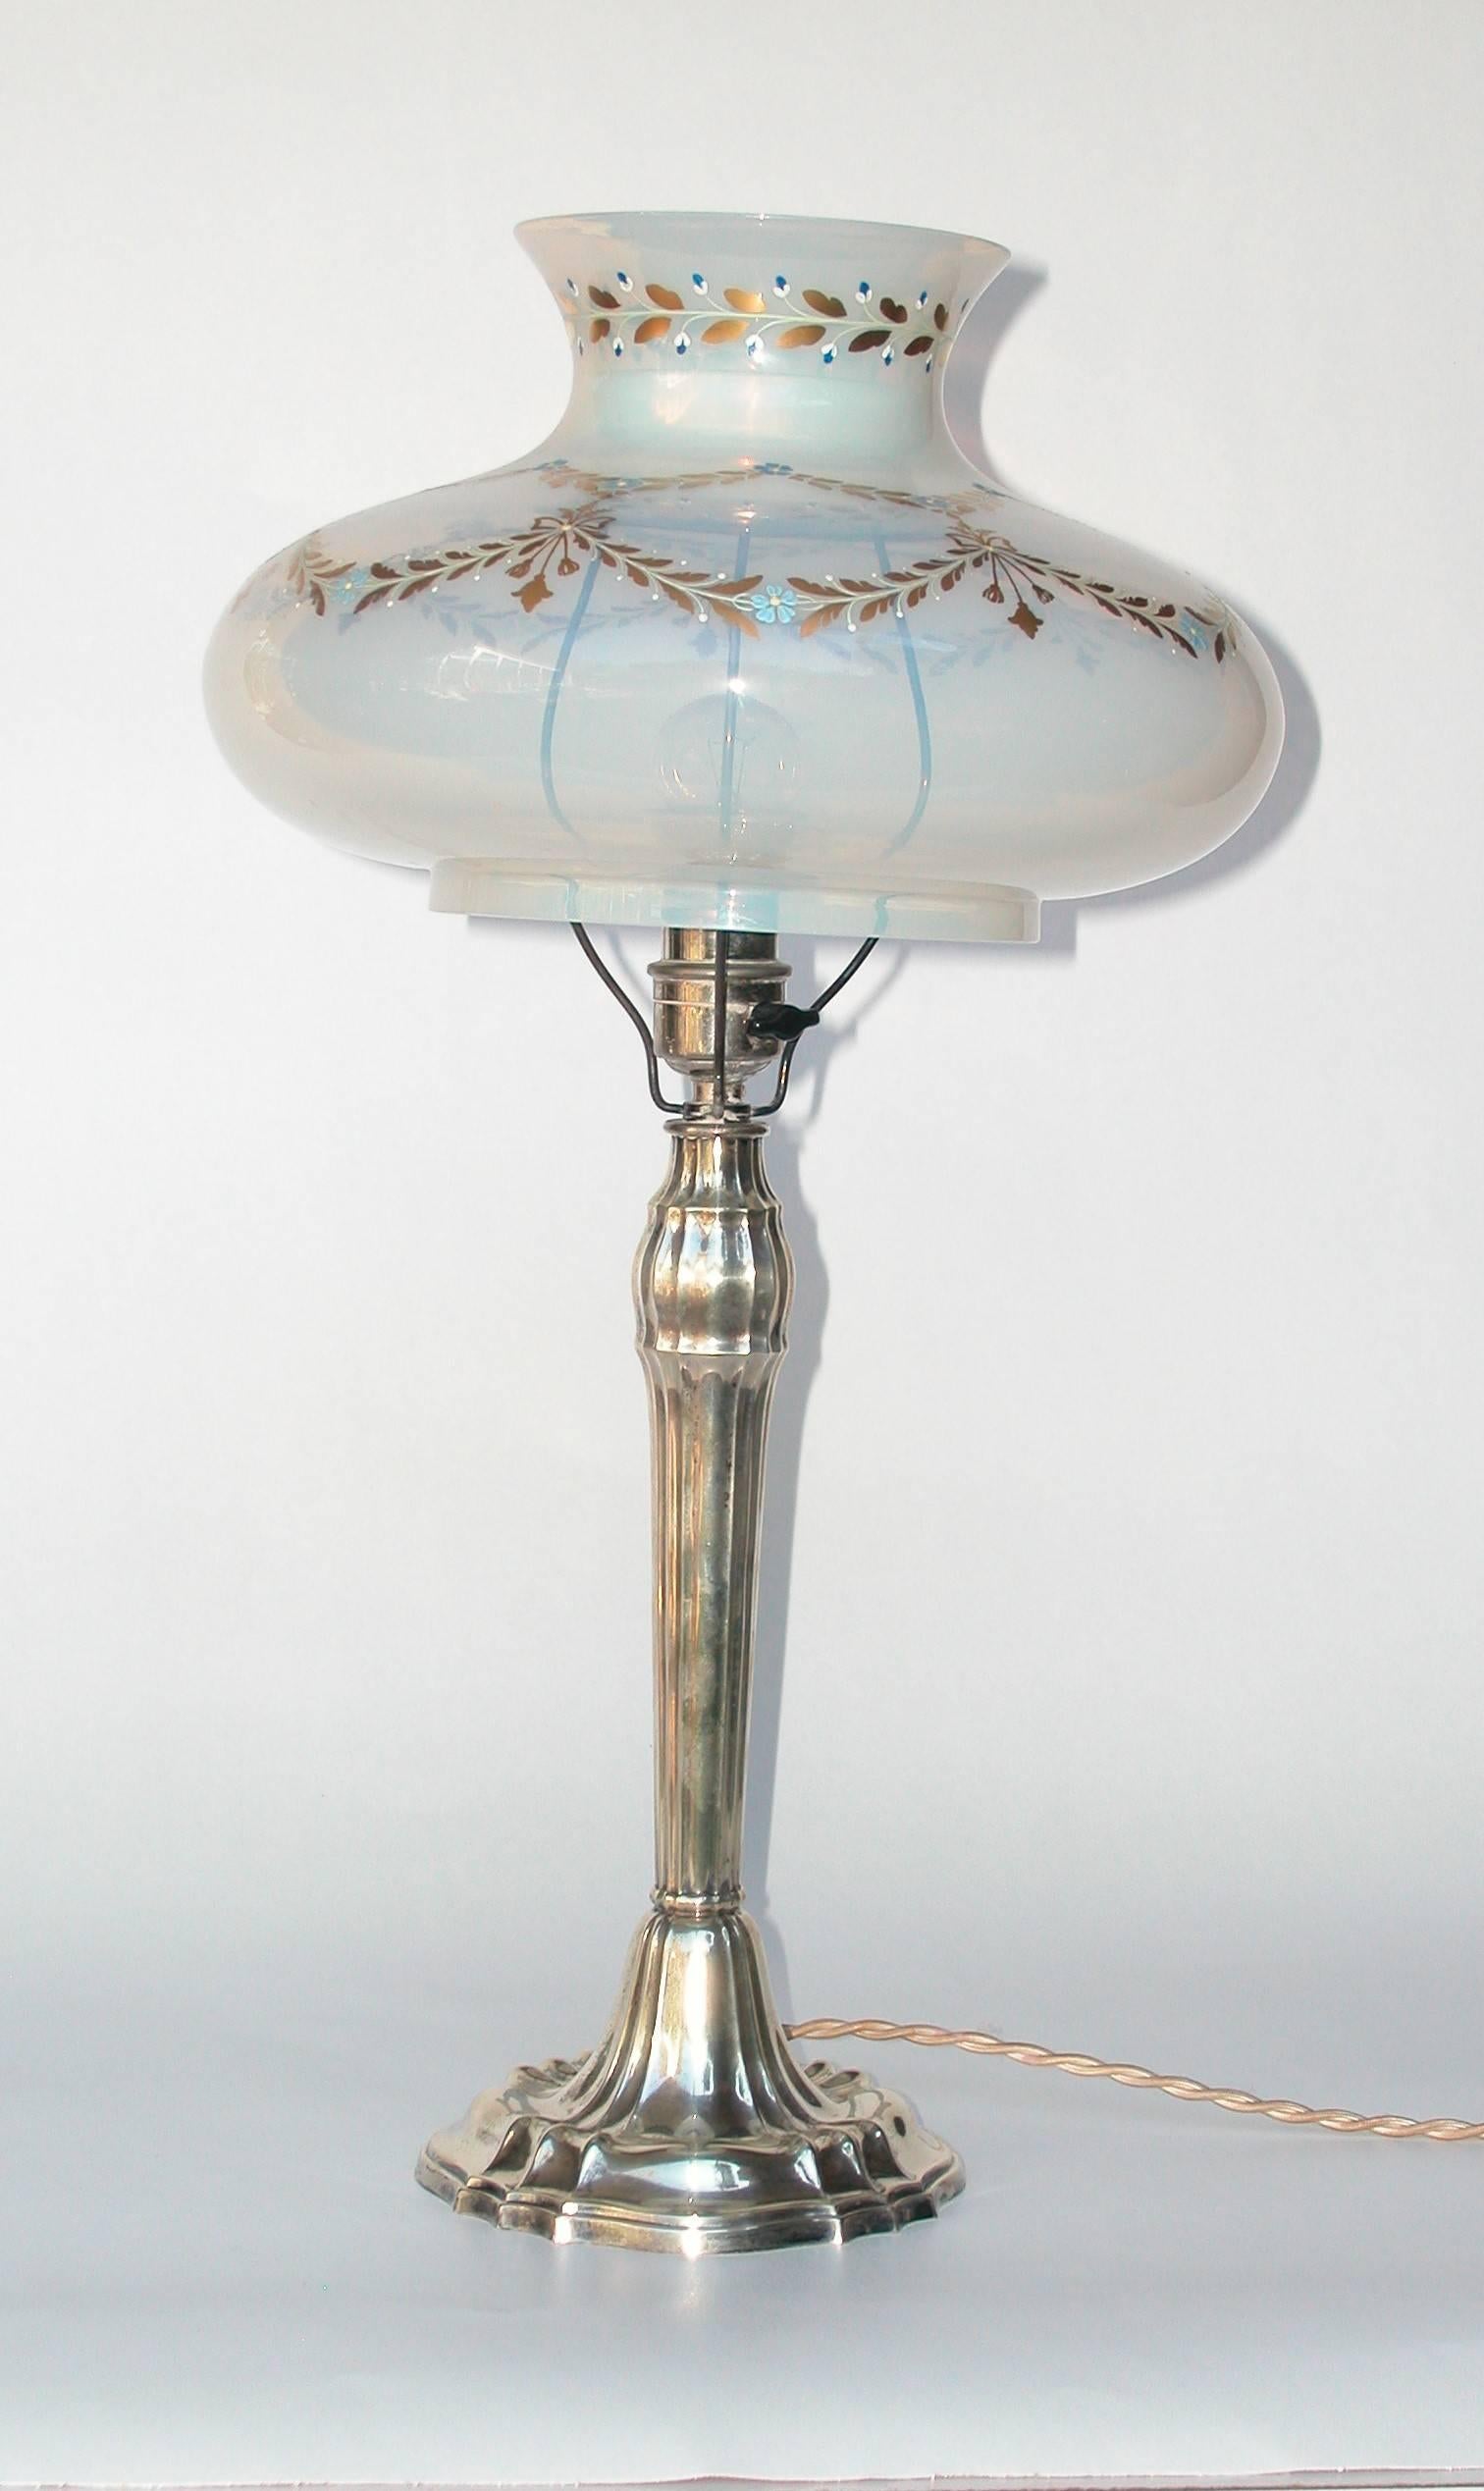 Early 20th Century German Art Nouveau Table Lamp by Wilkens & Söhne, Germany, circa 1910 For Sale